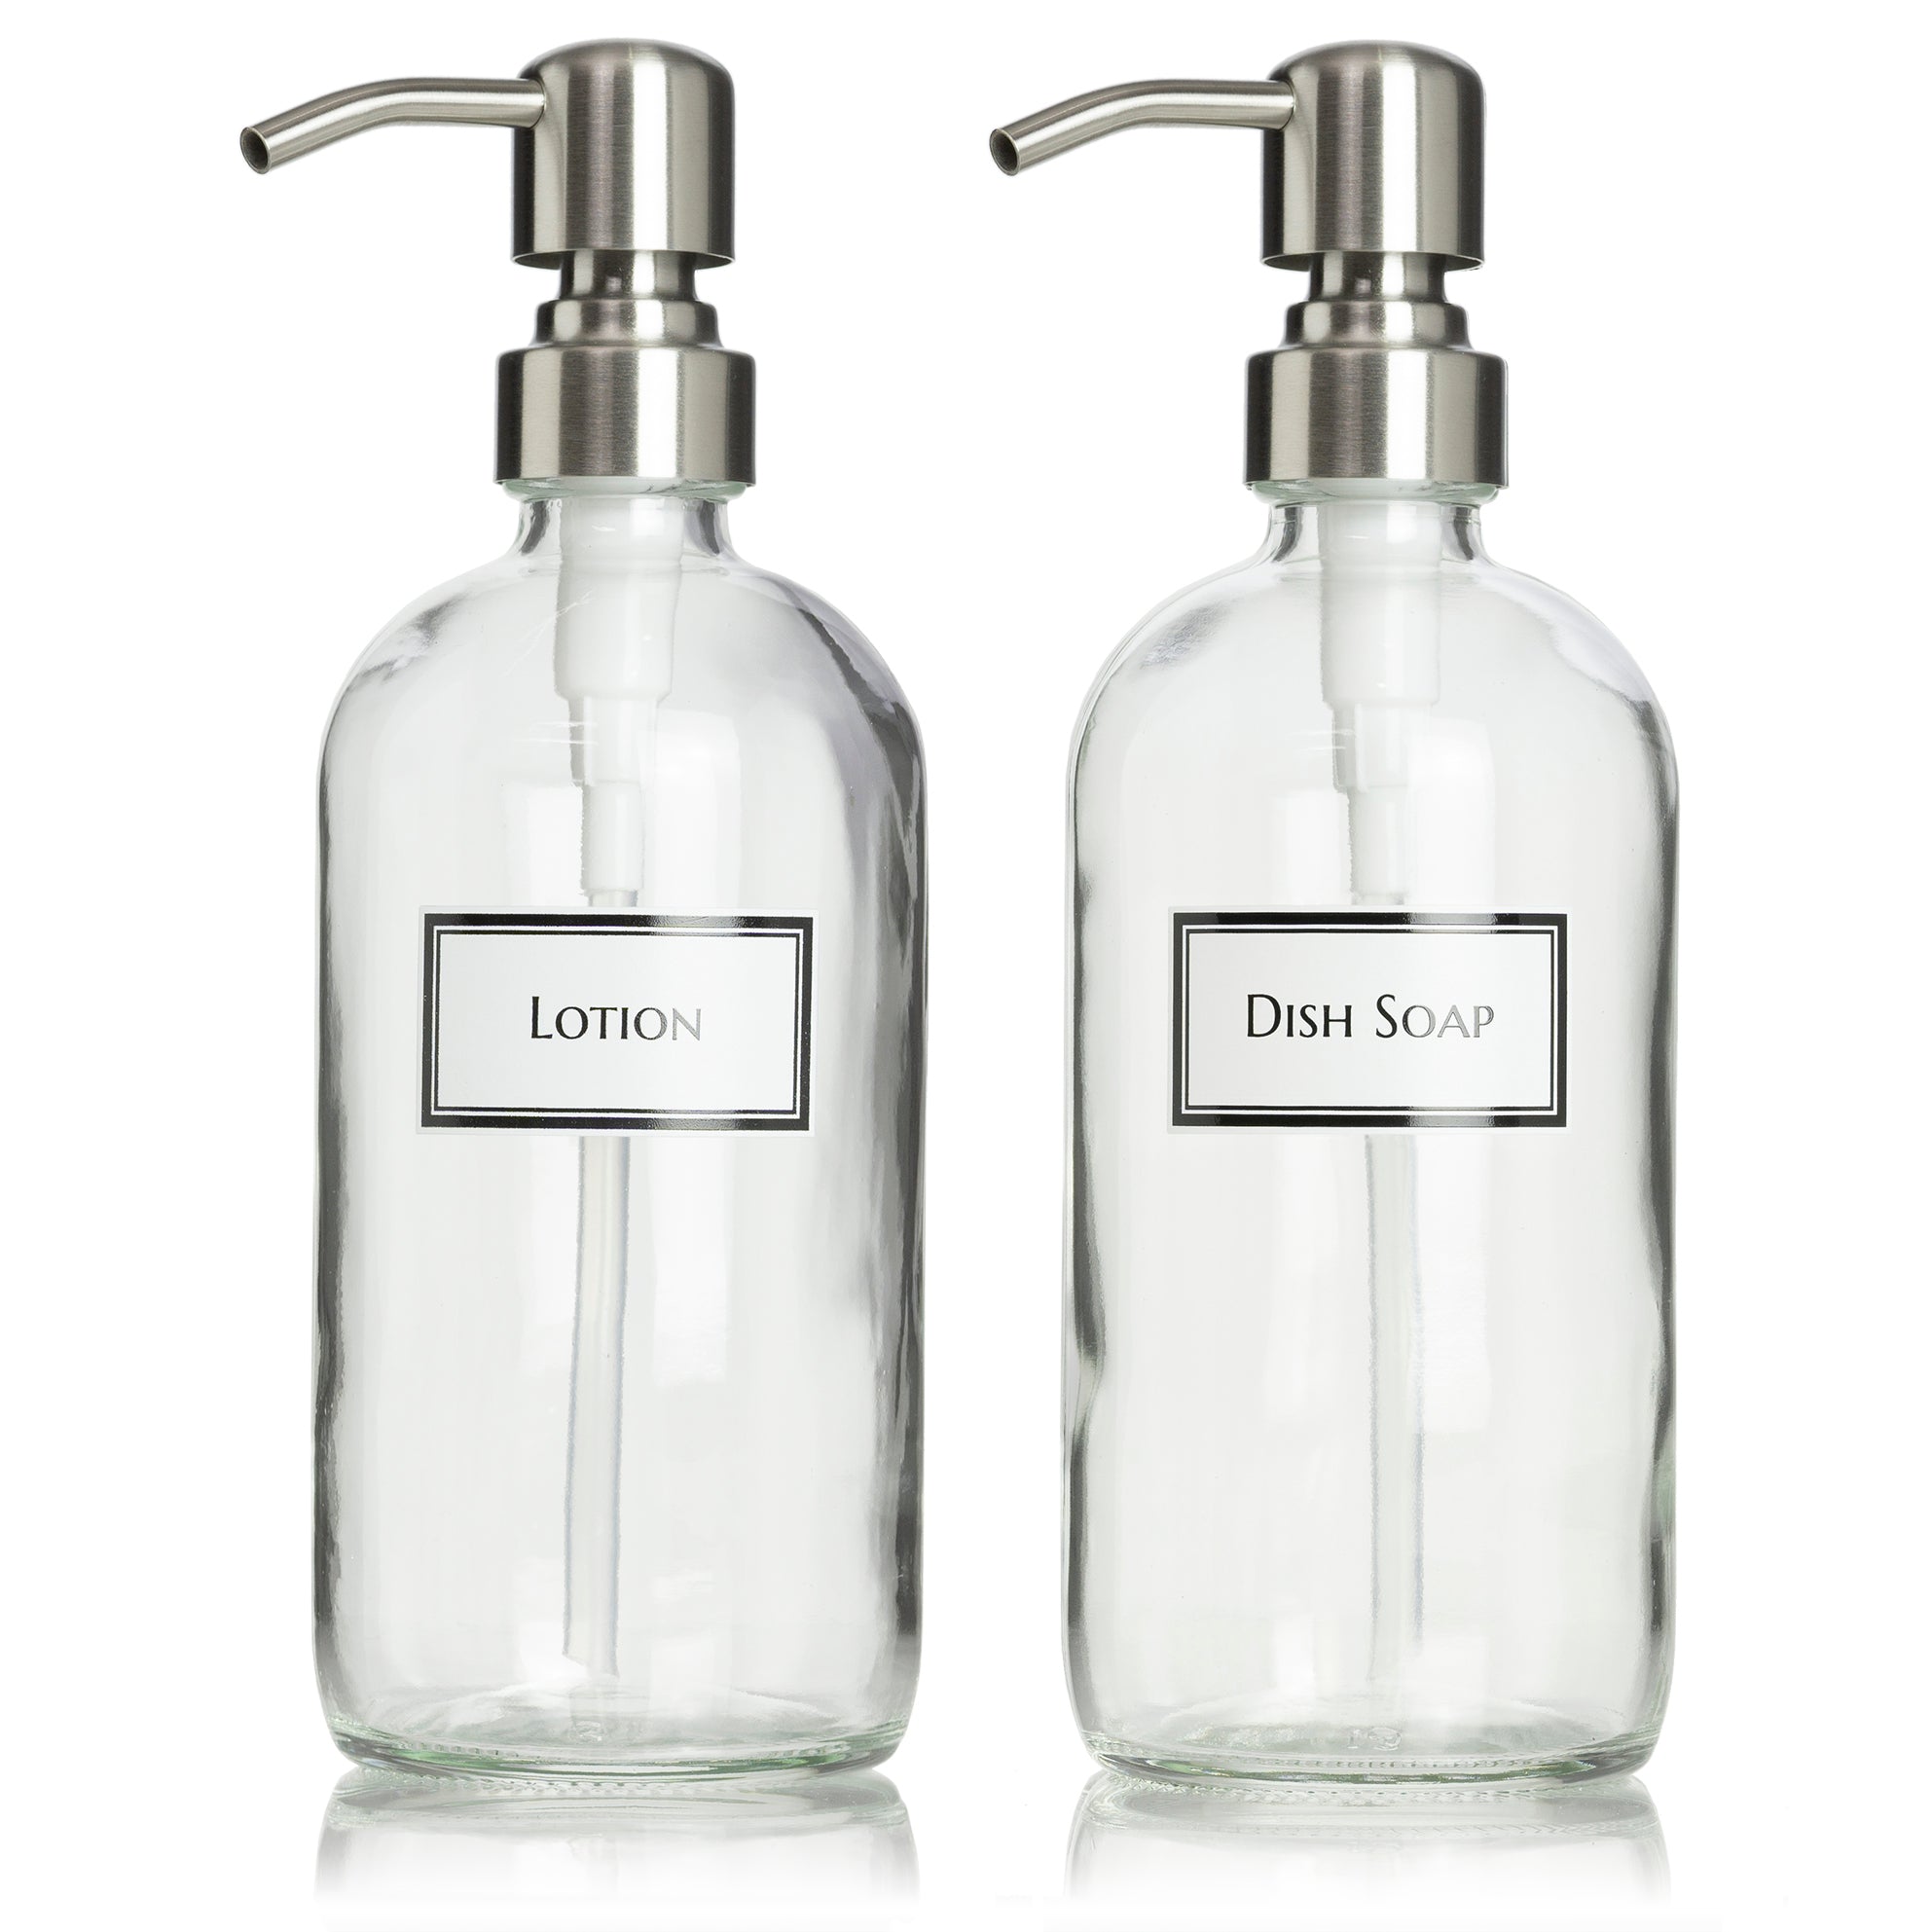 Set of two clear glass Boston round bottles with permanent ceramic printed text for "Lotion" and "Dish Soap". With 304 grade stainless steel pumps.